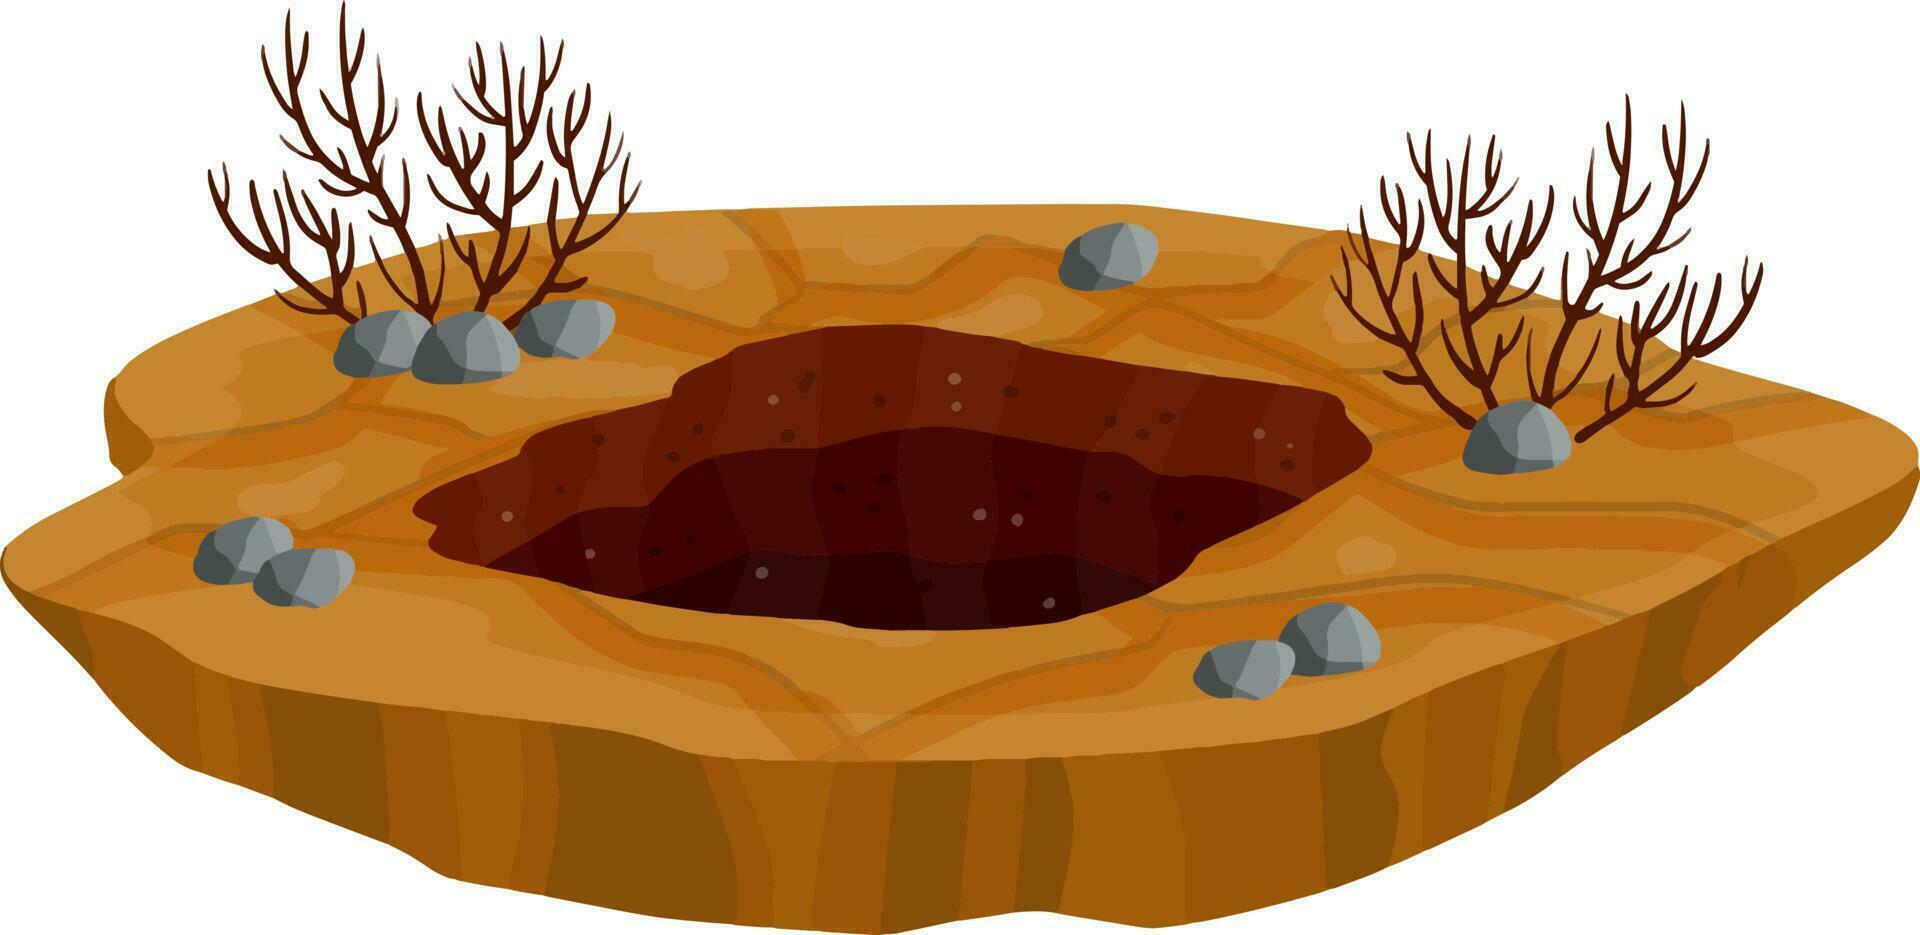 Big hole in ground. Brown dry soil and mine. Element of desert landscape. Cartoon illustration vector